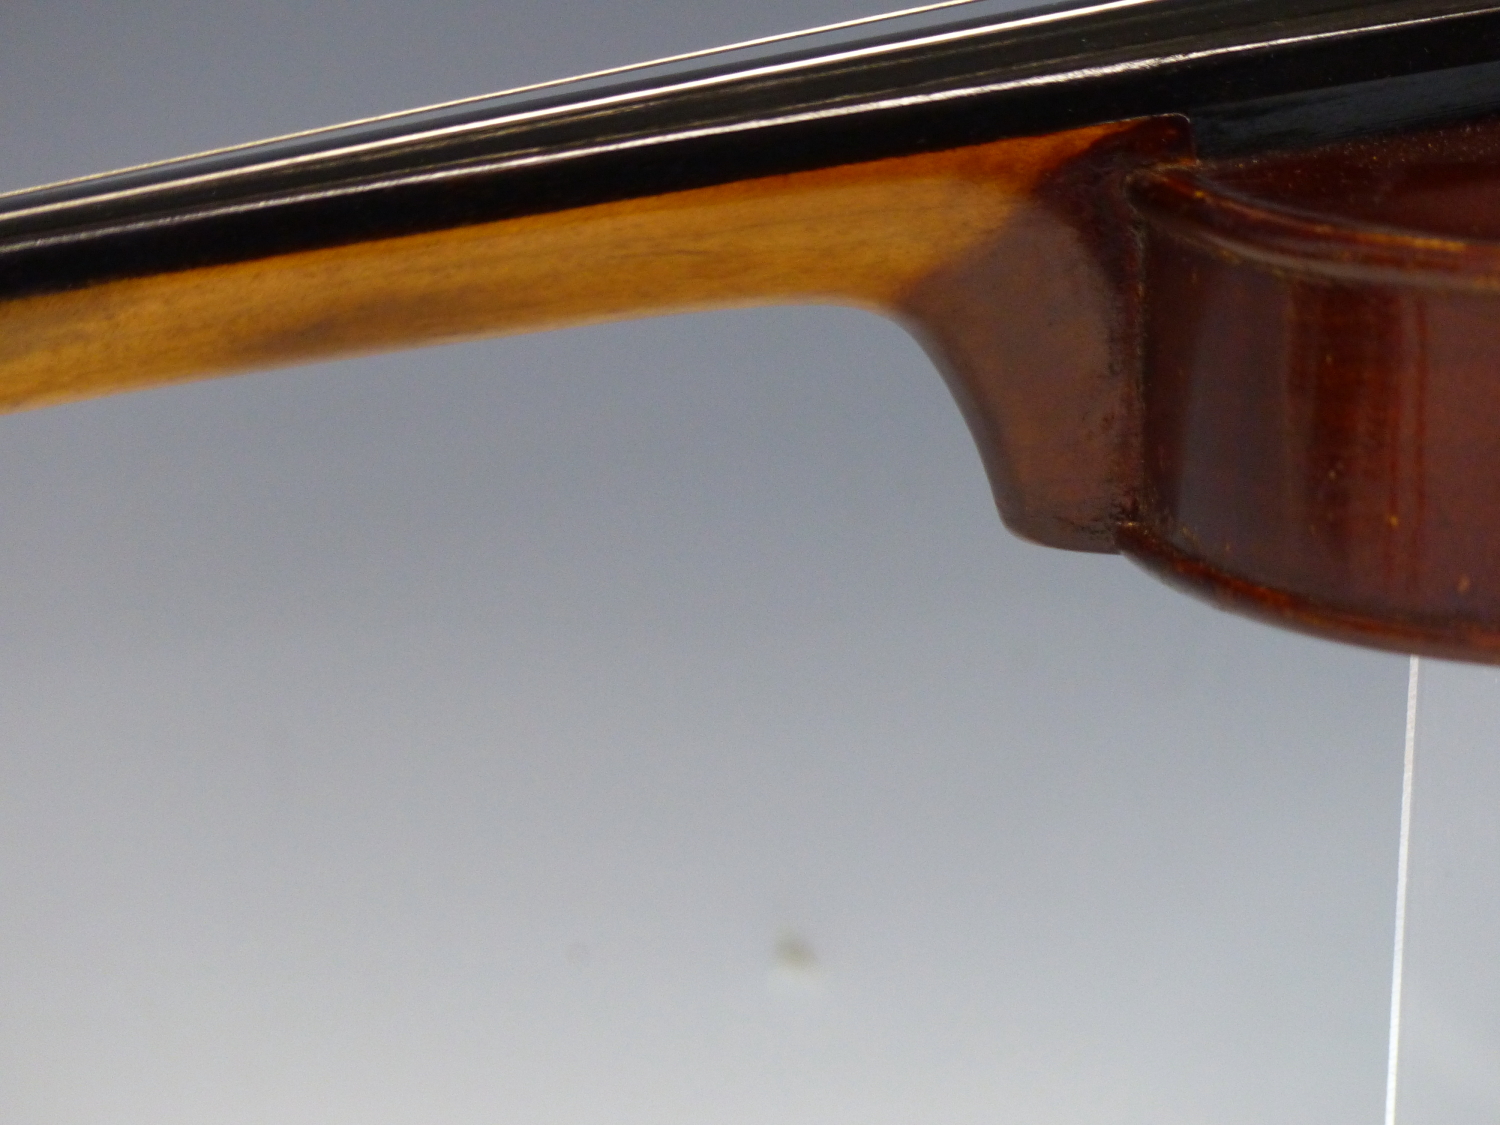 A 20TH CENTURY VIOLIN WITH LABEL " ANTONIUS STRADIUARIUS CREMONENSIS". CASED WITH A SILVER PLATE - Image 7 of 19